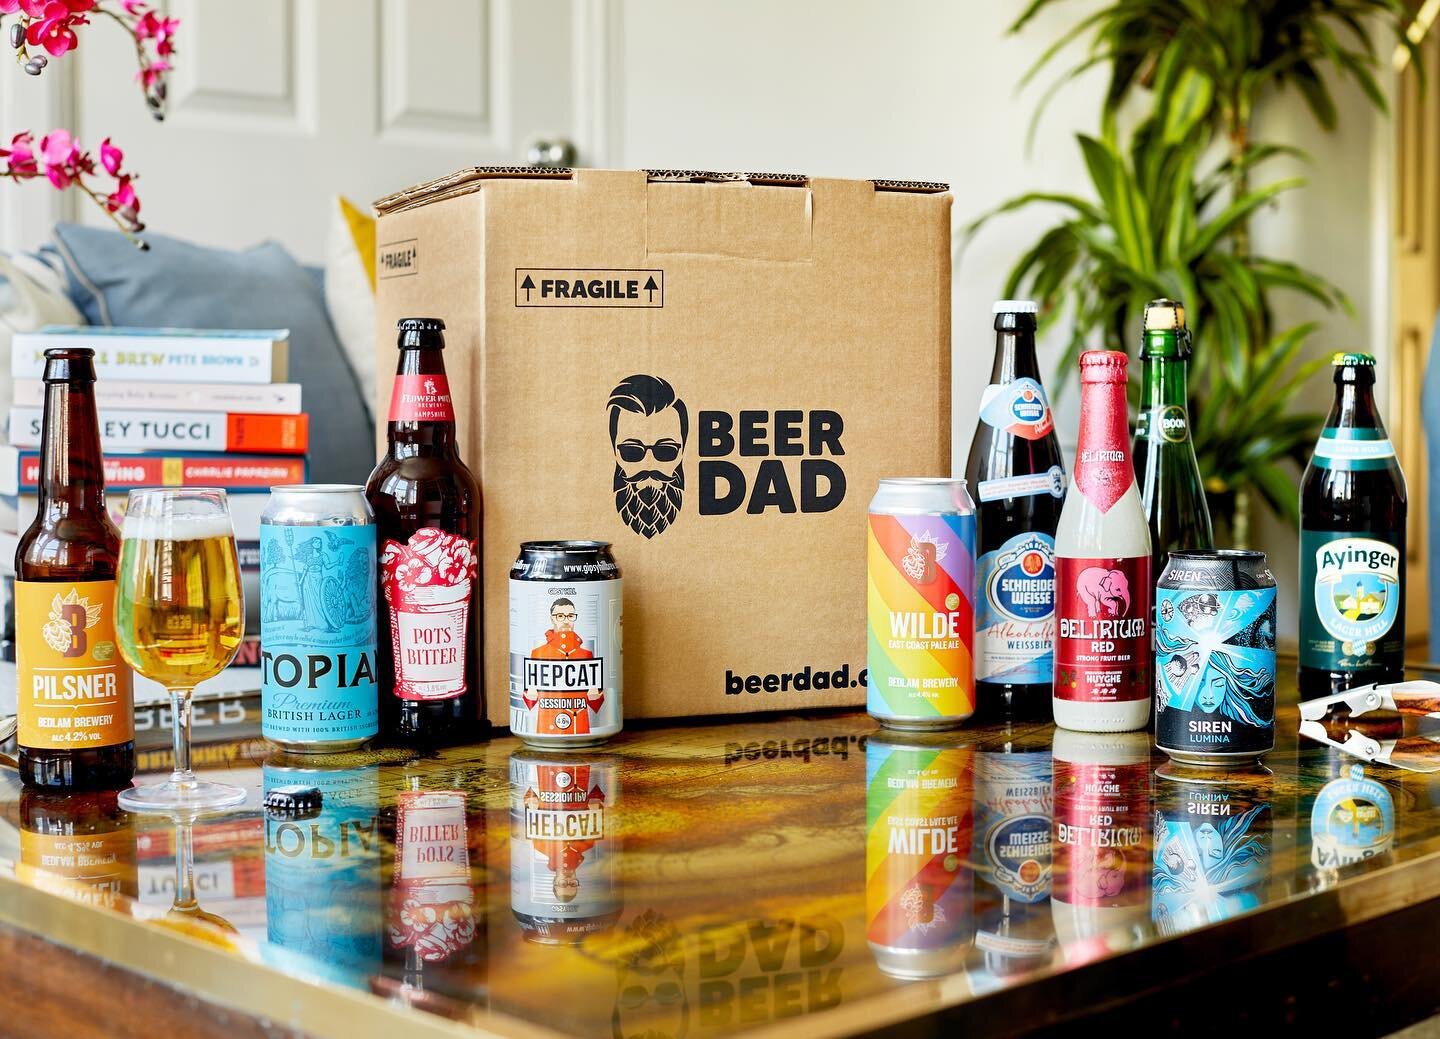 A true joy working with @beerdaduk. Launched this week, very well thought out and curated beer selection for all types of dads! From the extremely knowledgeable beer expert @jamie_percival85. I was also lucky enough to sample a few😀. 
.
.
.
.
.
.
.
